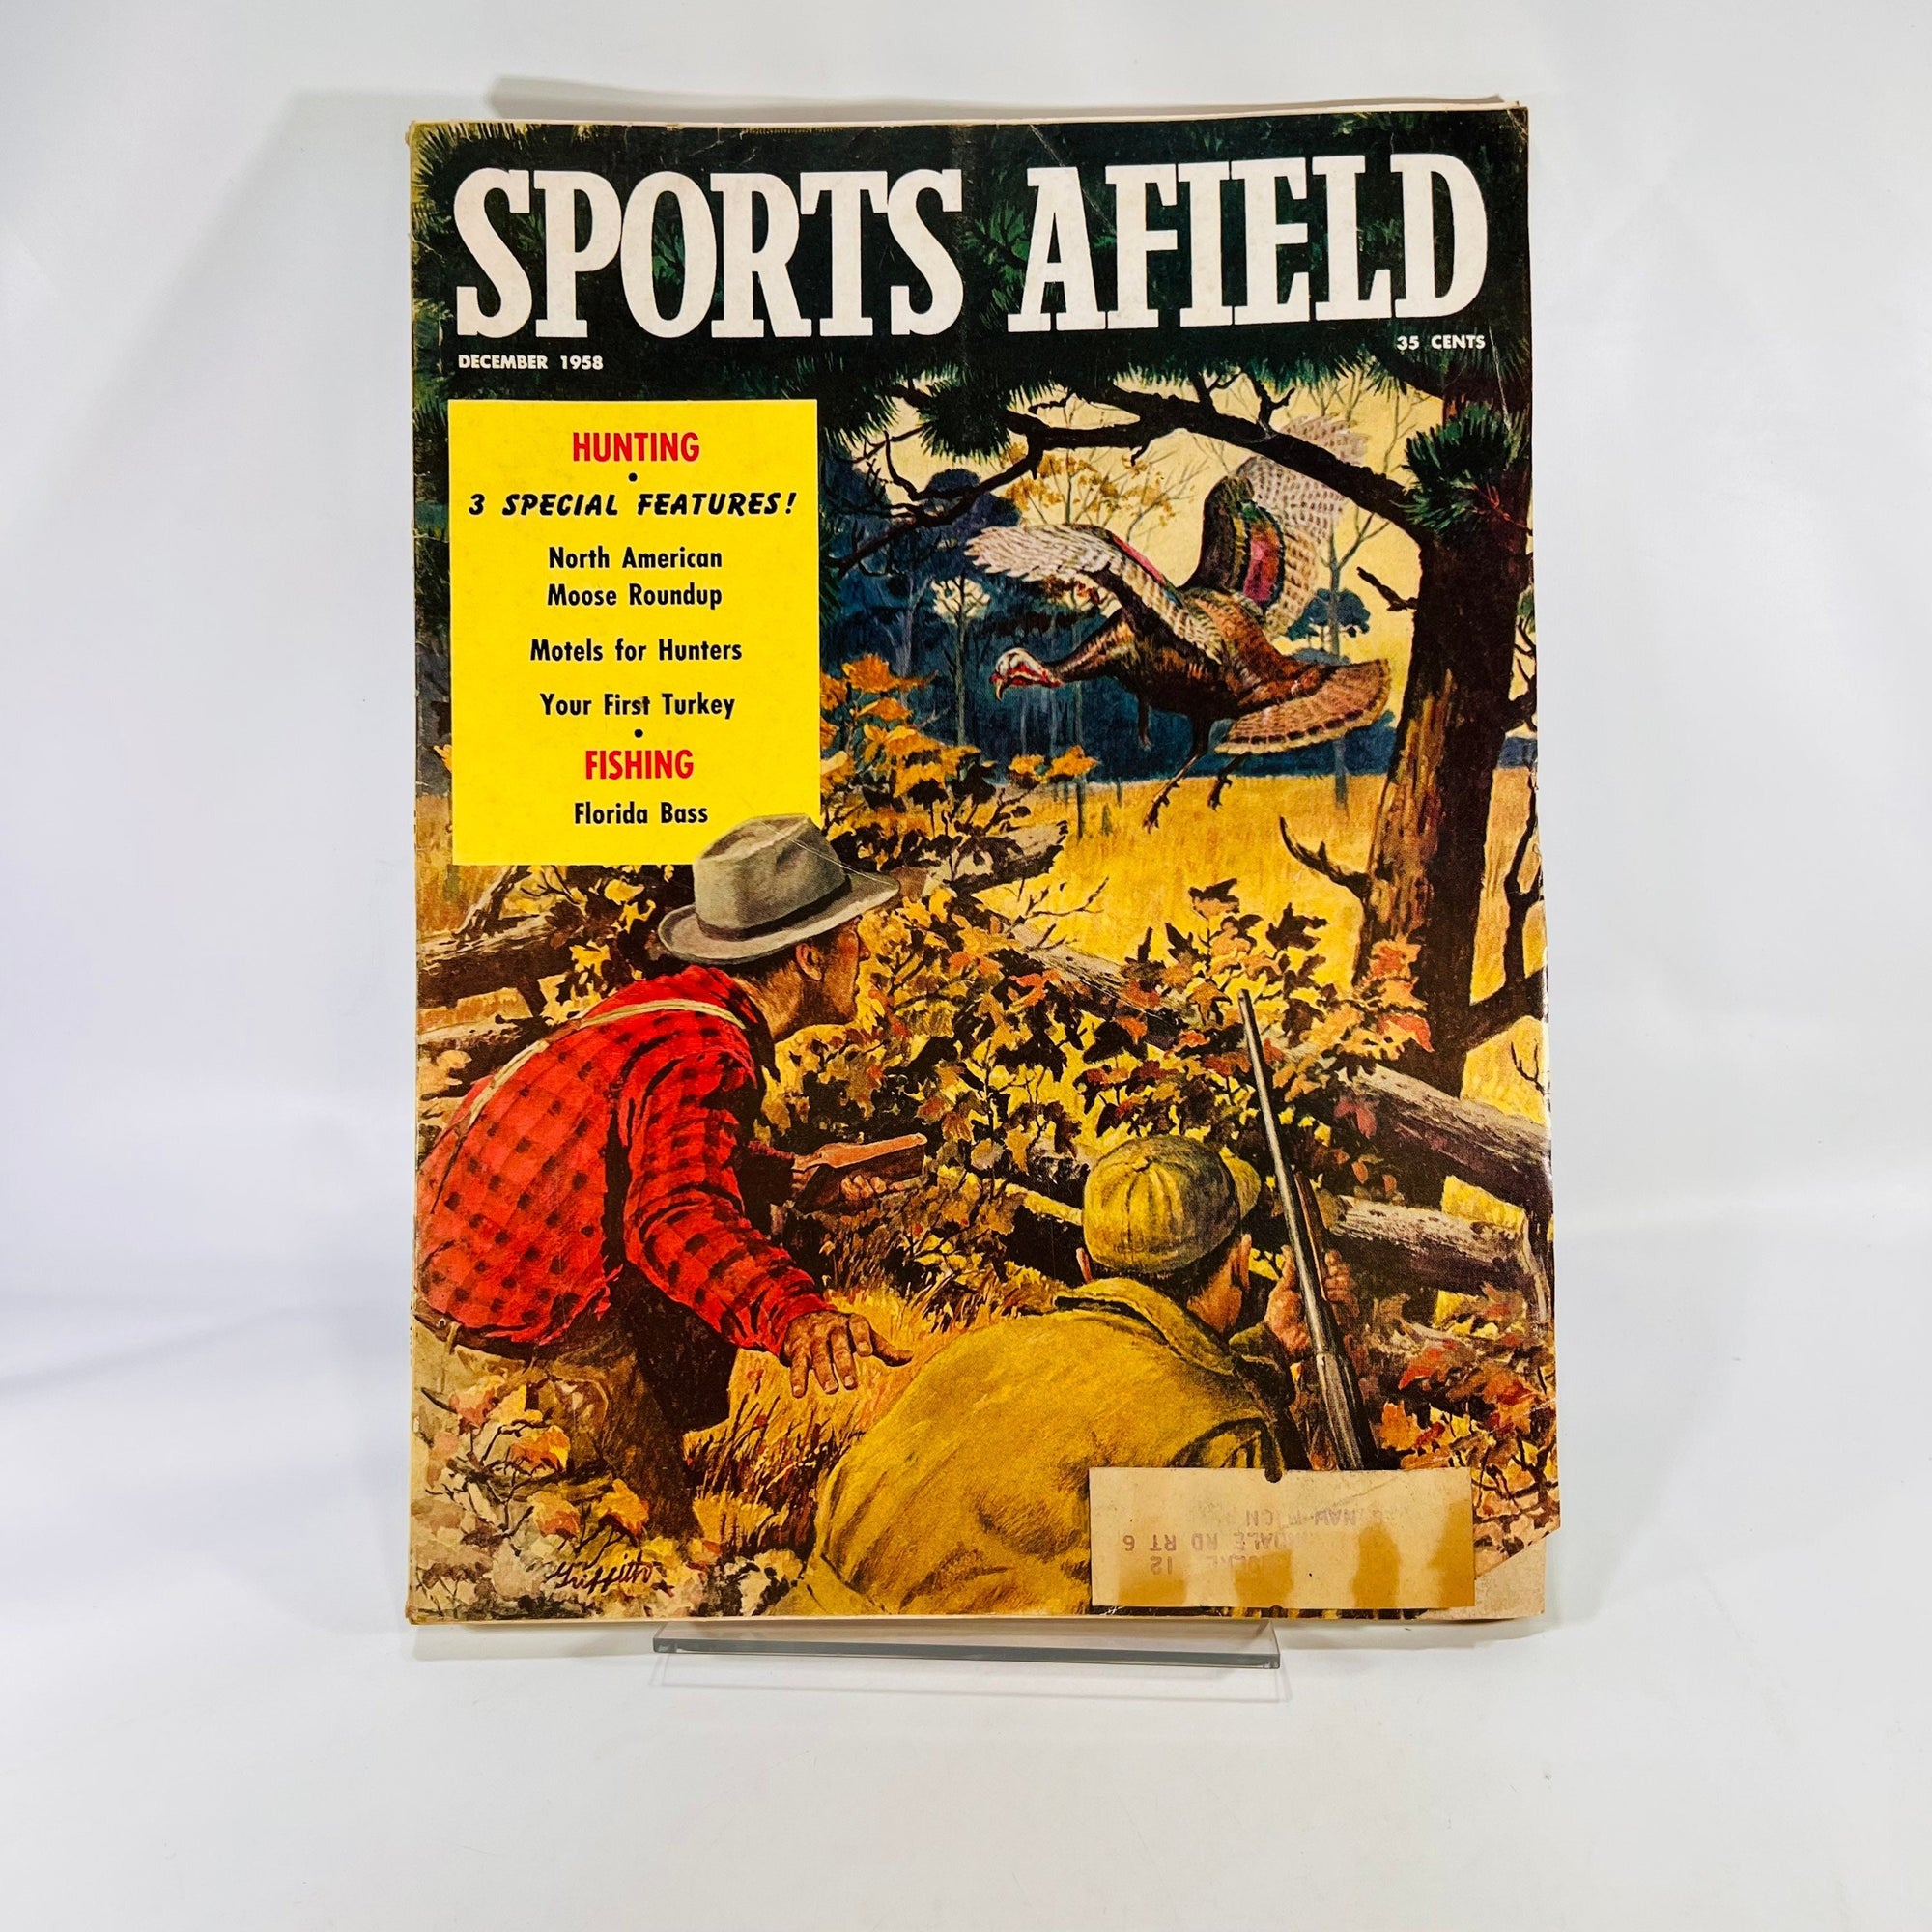 Sports Afield Vintage Magazine December 1958 Volume 140 Number 6 Hearst Corp. Hunting Fishing Advertising